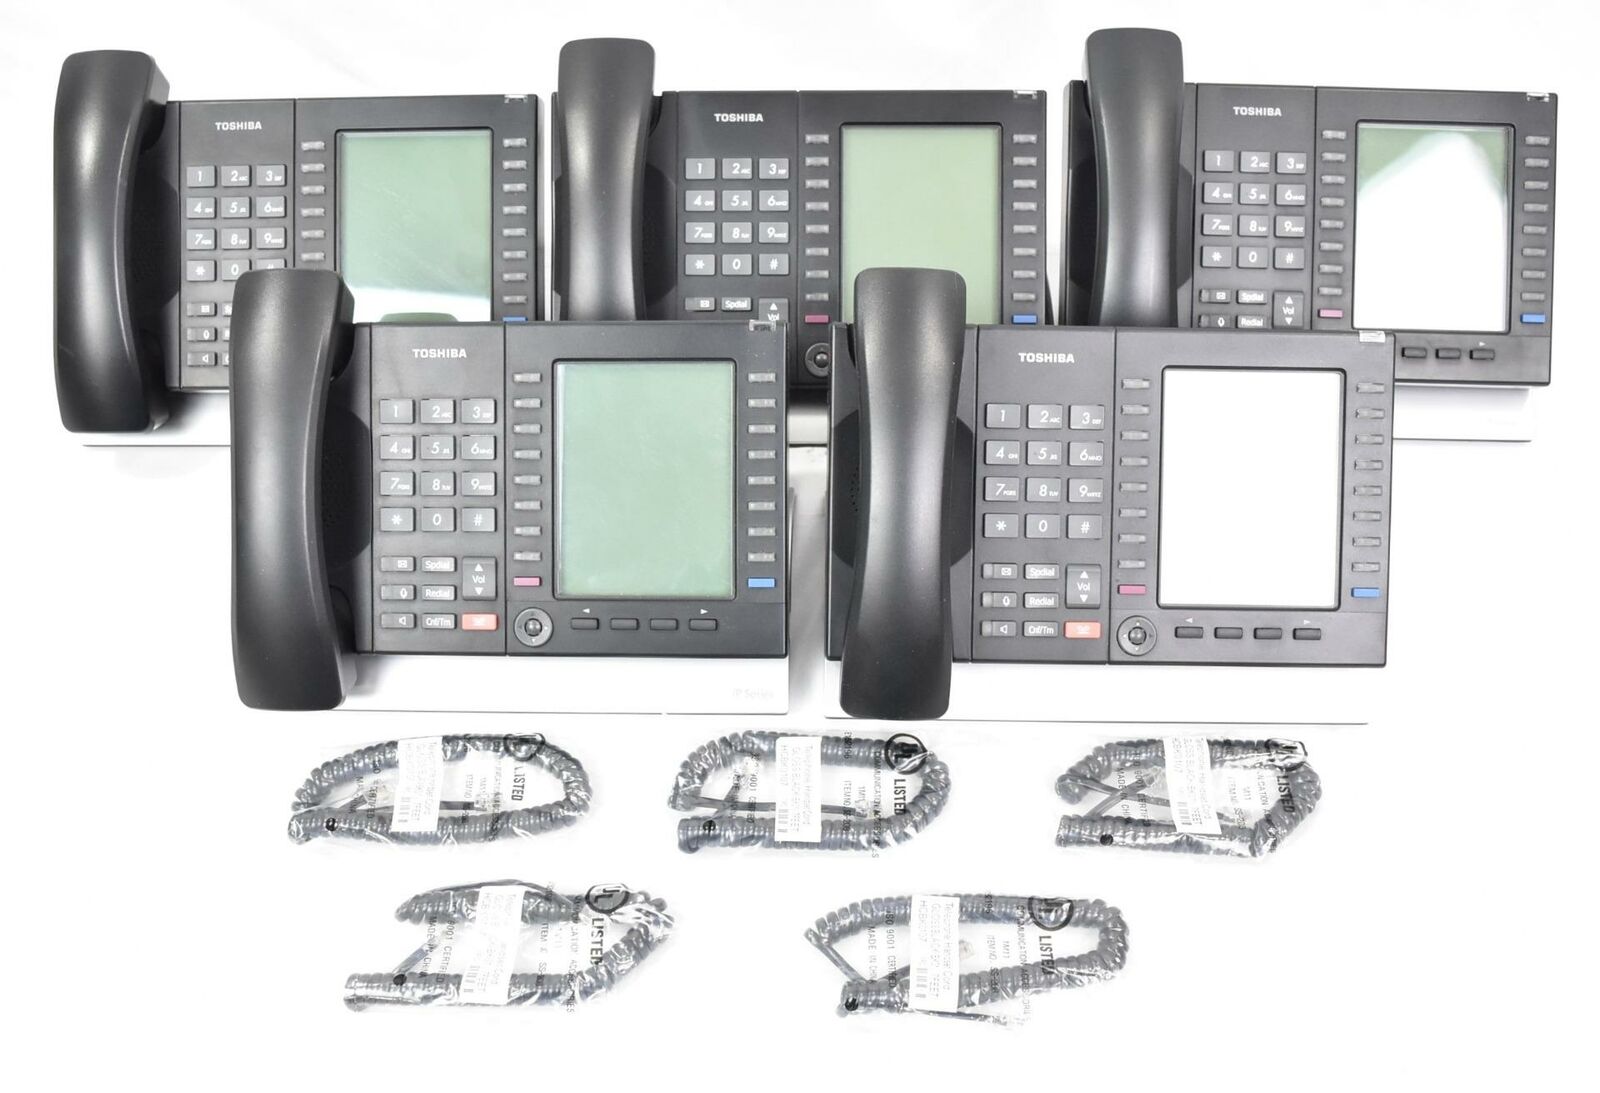 Lot of (5) Toshiba IP5631-SDL PoE VoIP Business Phones